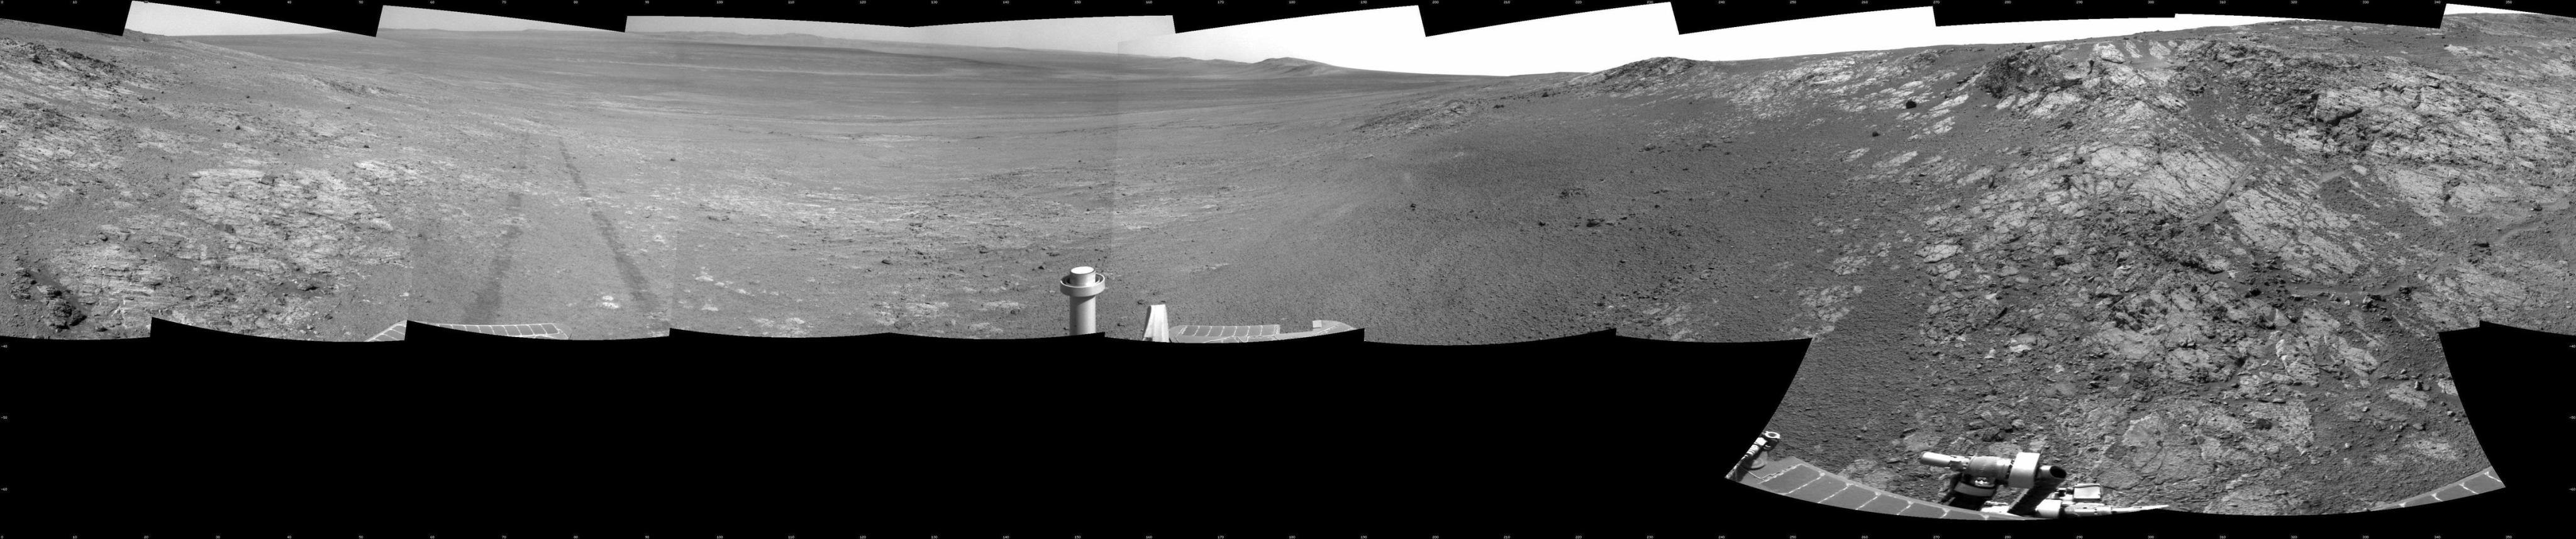 This full-circle panorama shows the terrain around the NASA Mars Exploration Rover Opportunity during the 3,105th Martian day, or sol, of the rover's work on Mars (Oct. 18, 2012).